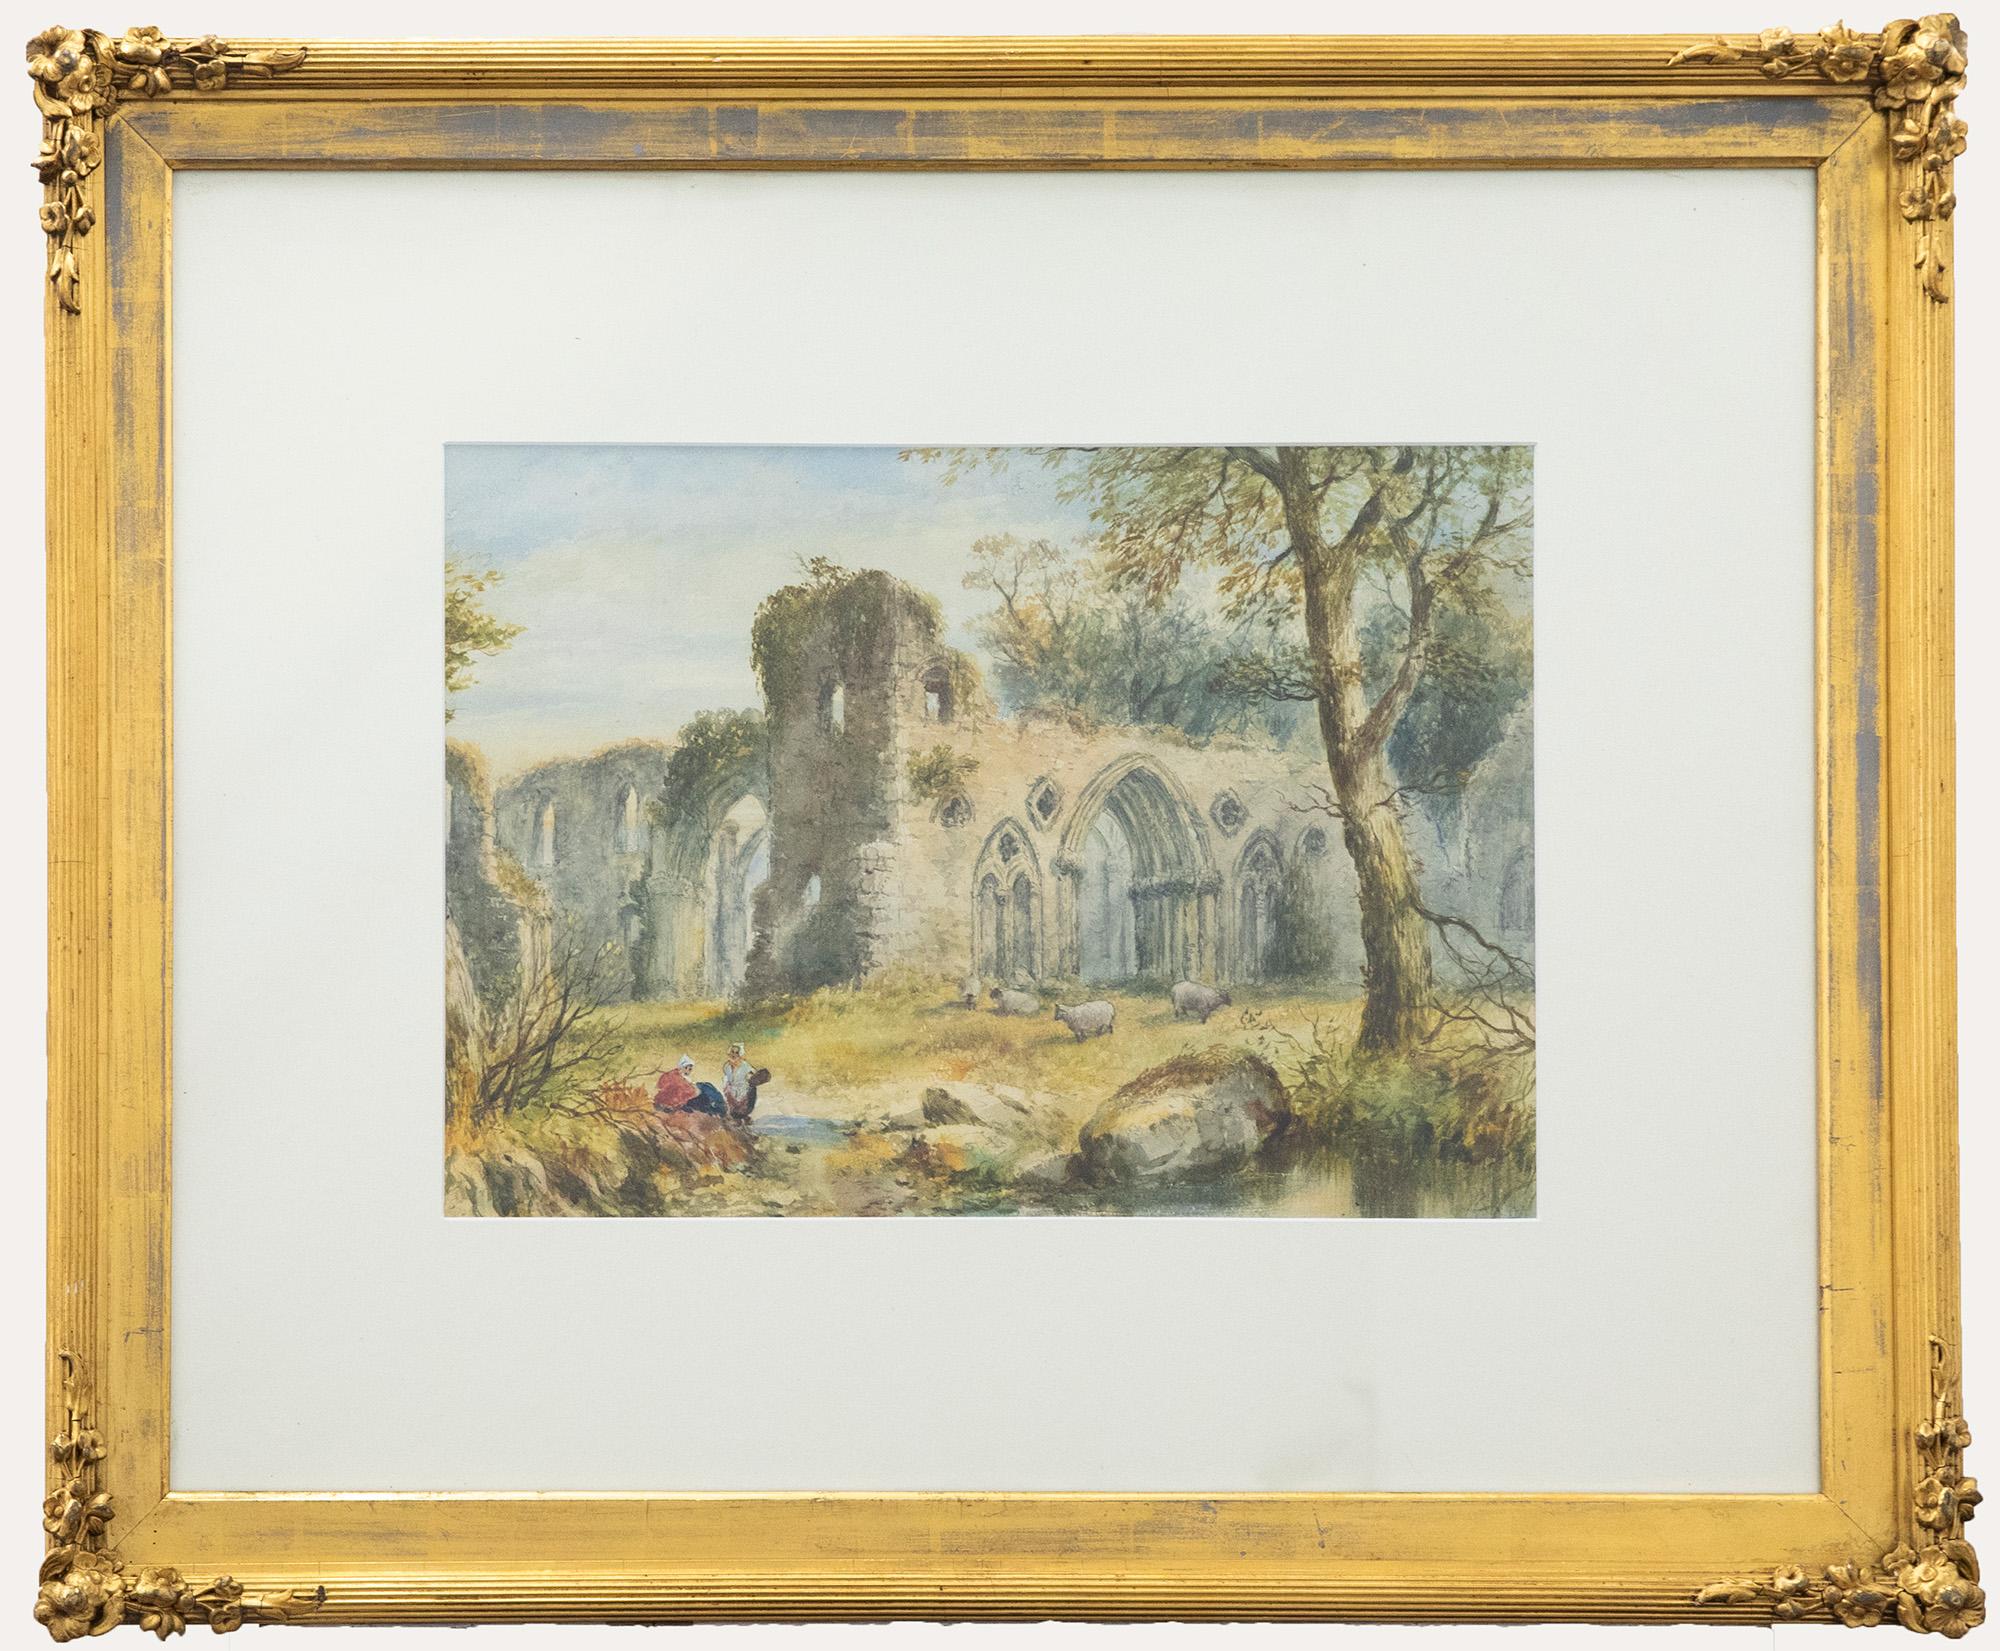 Unknown Landscape Art - Framed Late 19th Century Watercolour - Flocked by Abbey Ruins